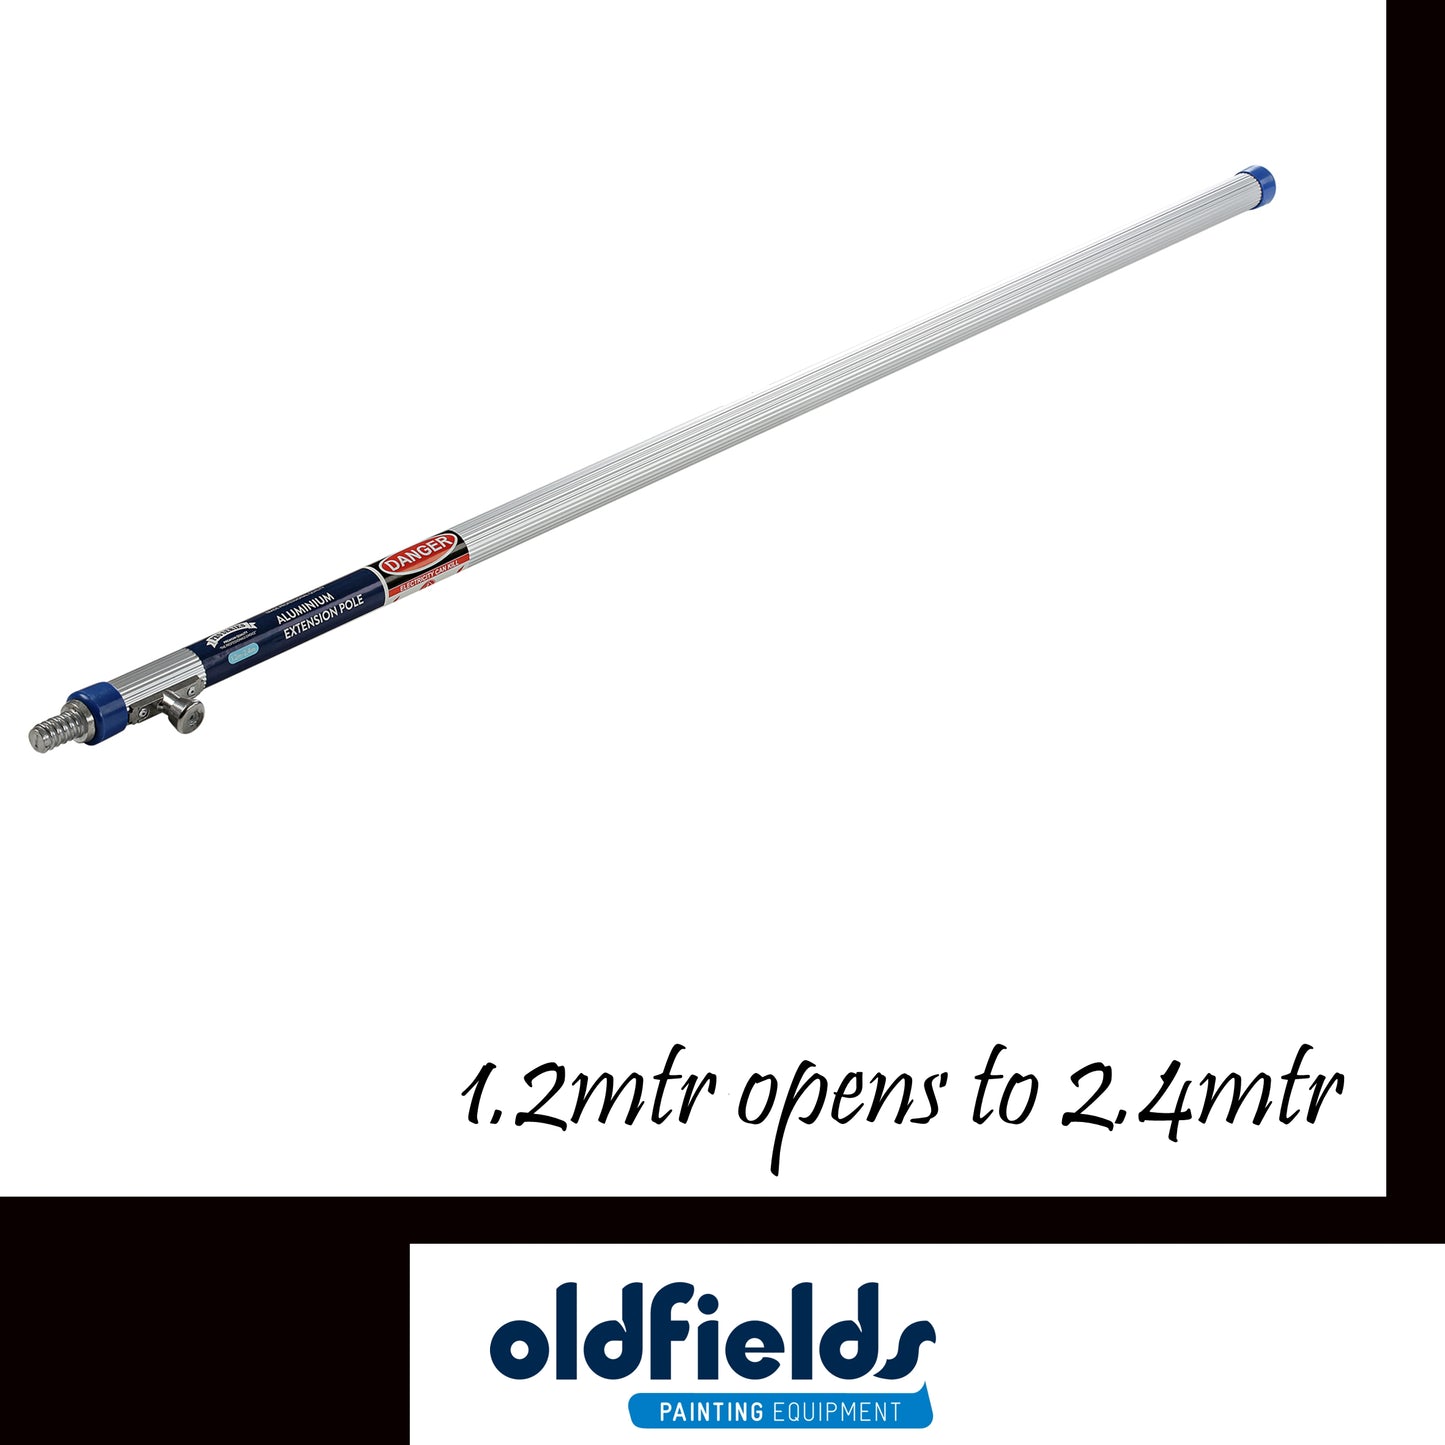 Pro series Aluminium Extension Poles 1.2mtr - 2.4mtr from Oldfields